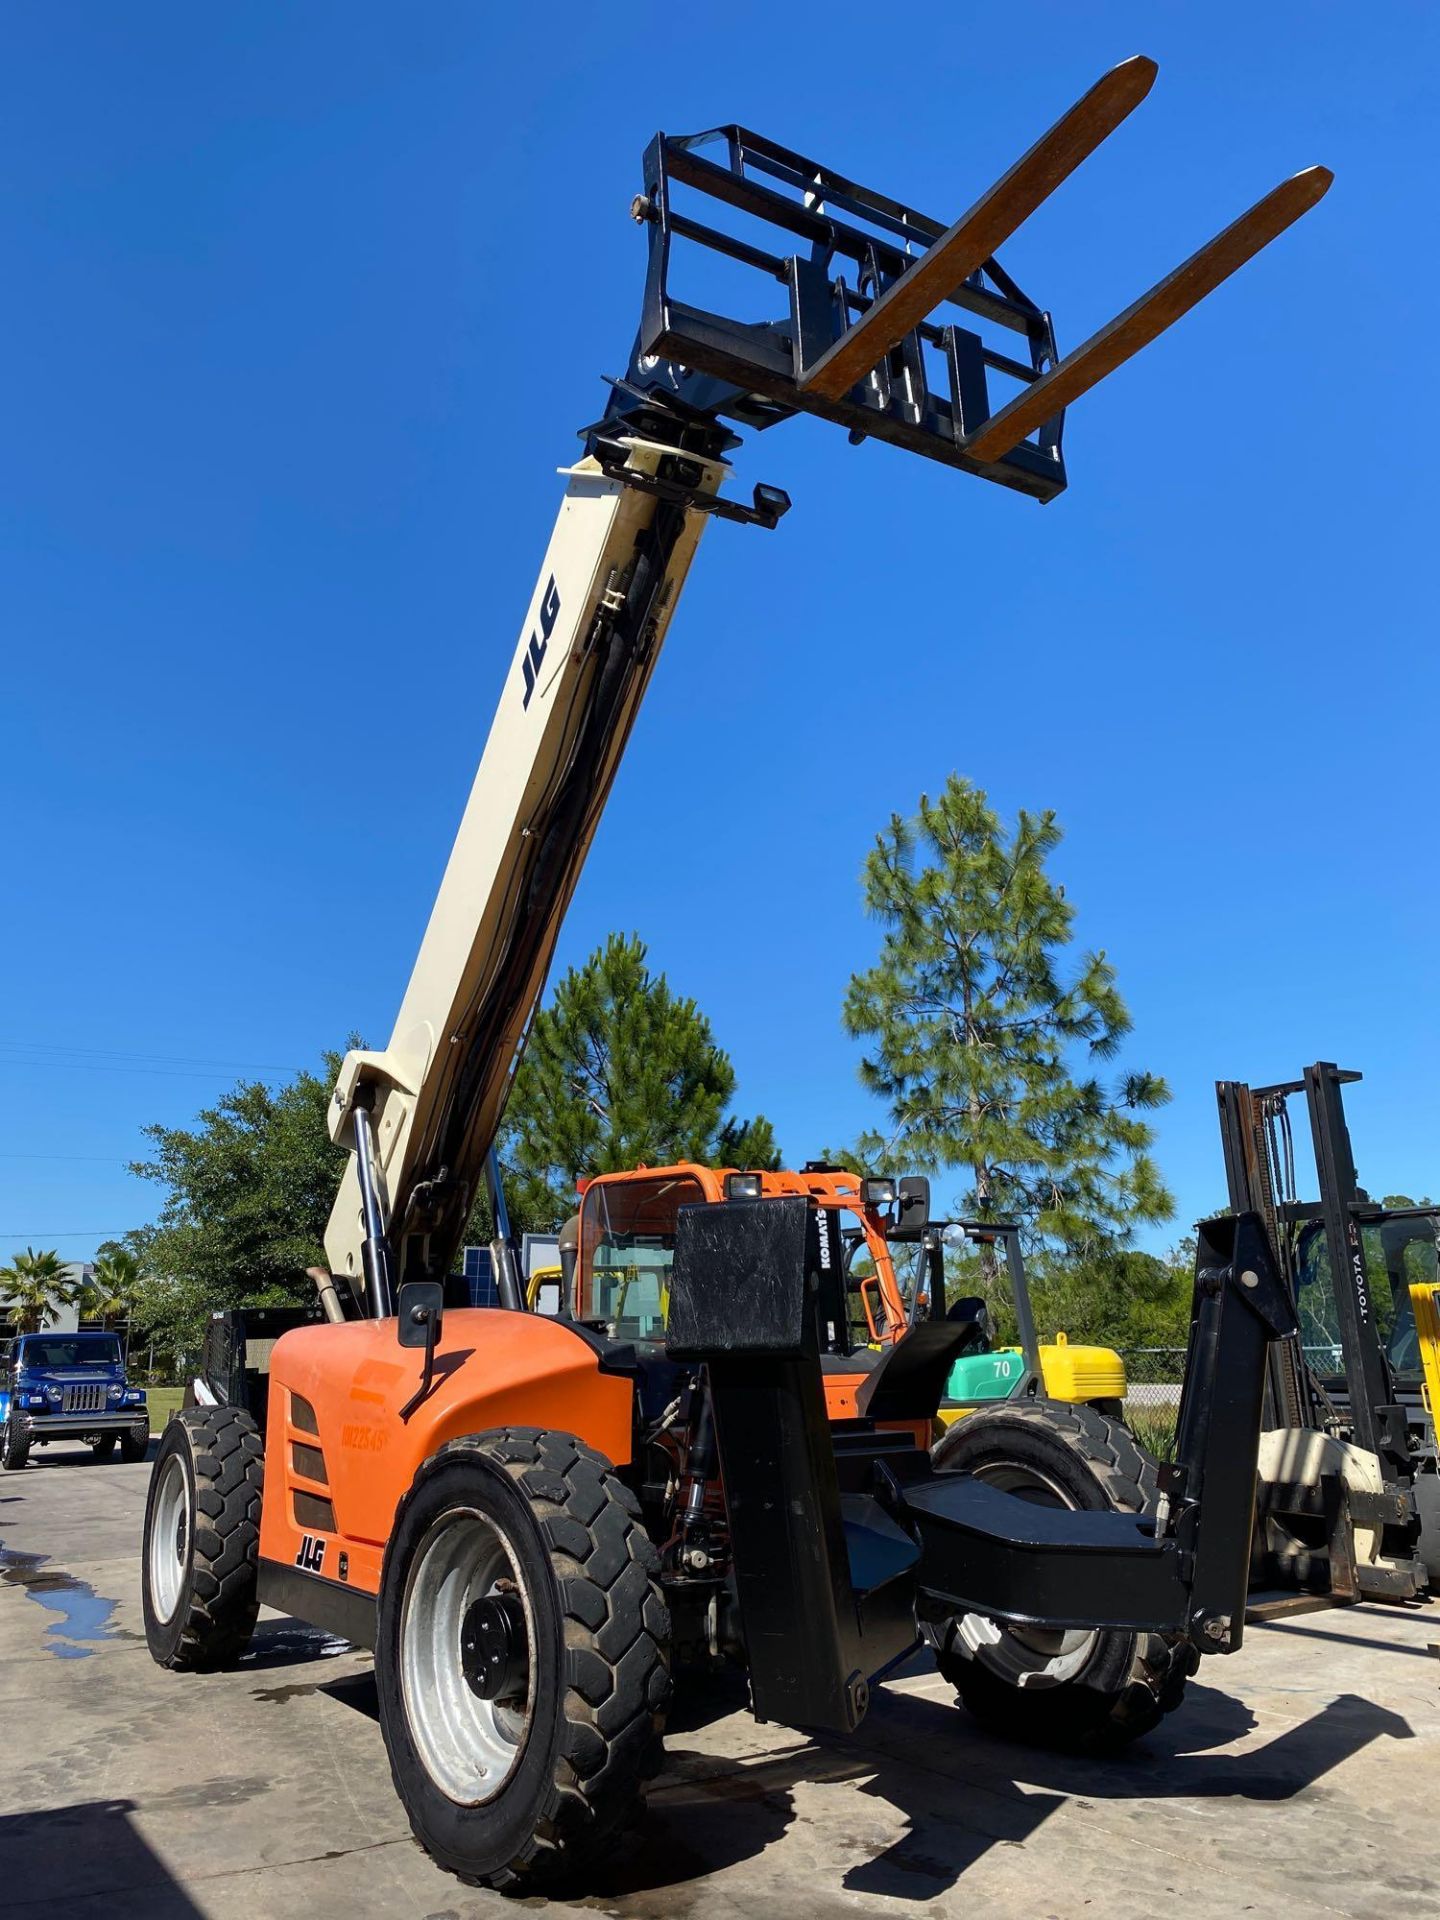 2013 JLG TELESCOPIC FORKLIFT MODEL G10-55A, 10,000 LB CAPACITY, OUTRIGGERS, 5,717.7 HOURS SHOWING, C